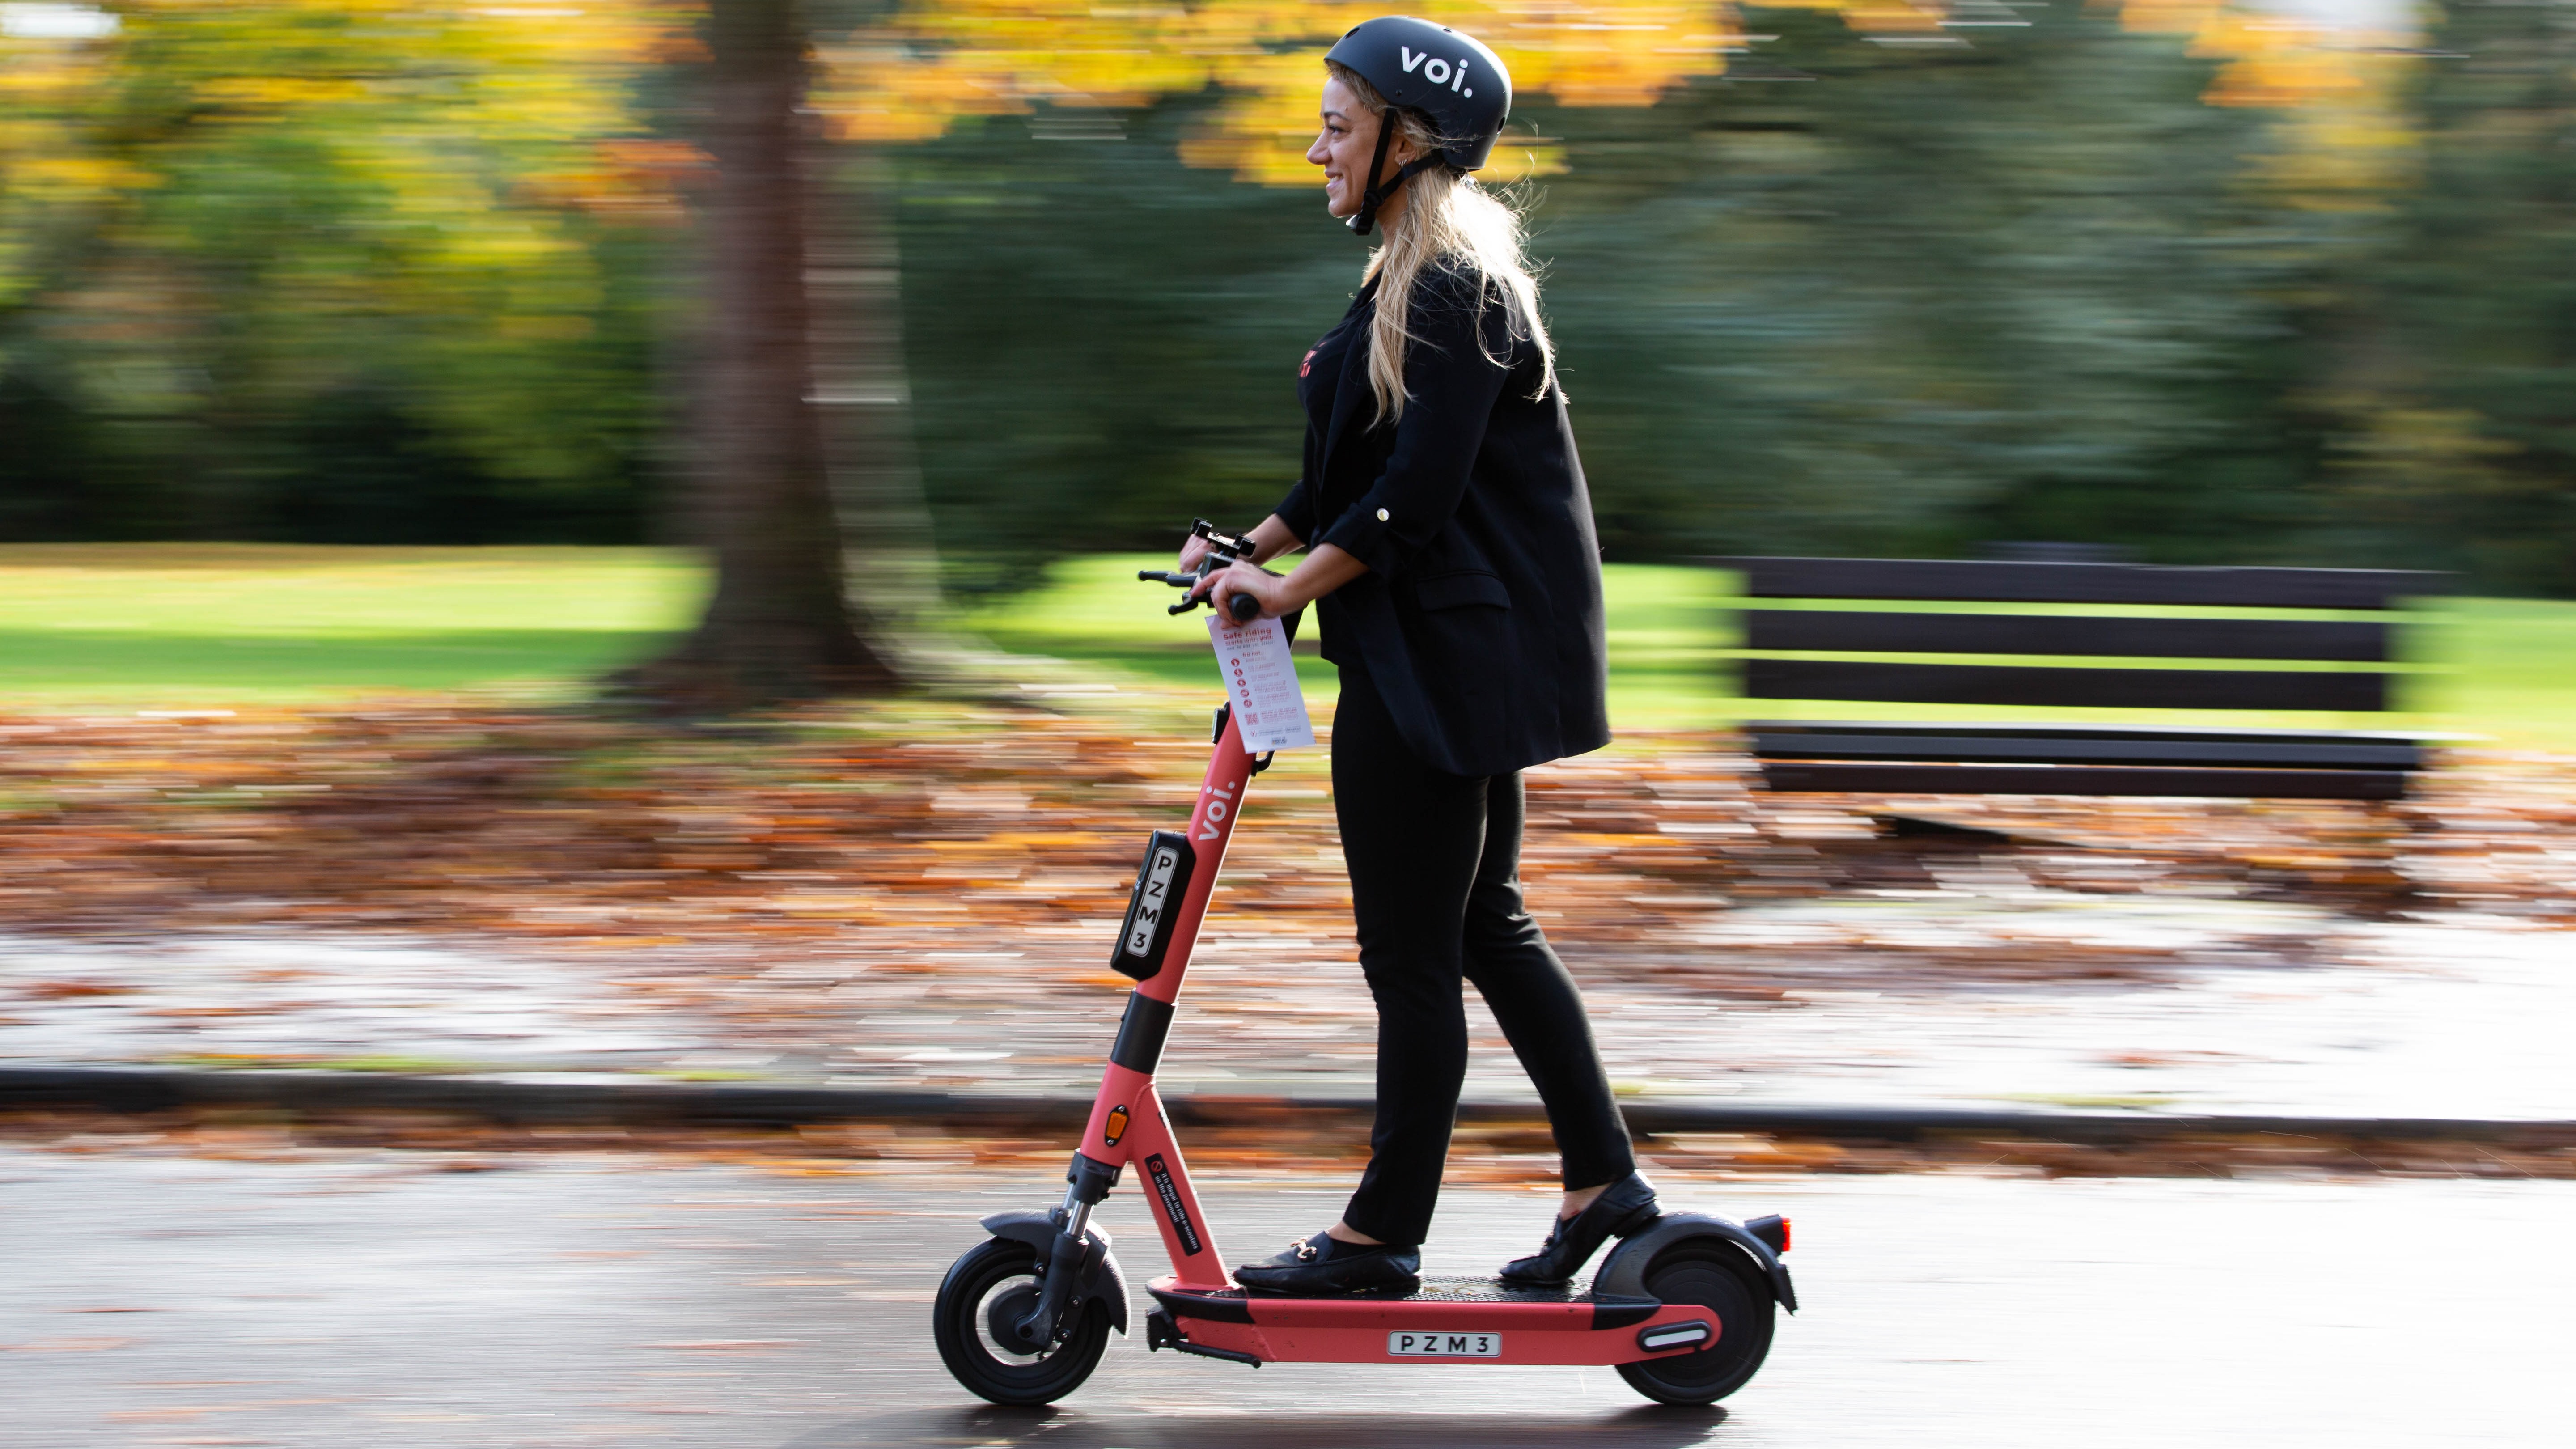 Voi e-scooters could be axed Bristol and Bath amid Russia links | ITV News Country